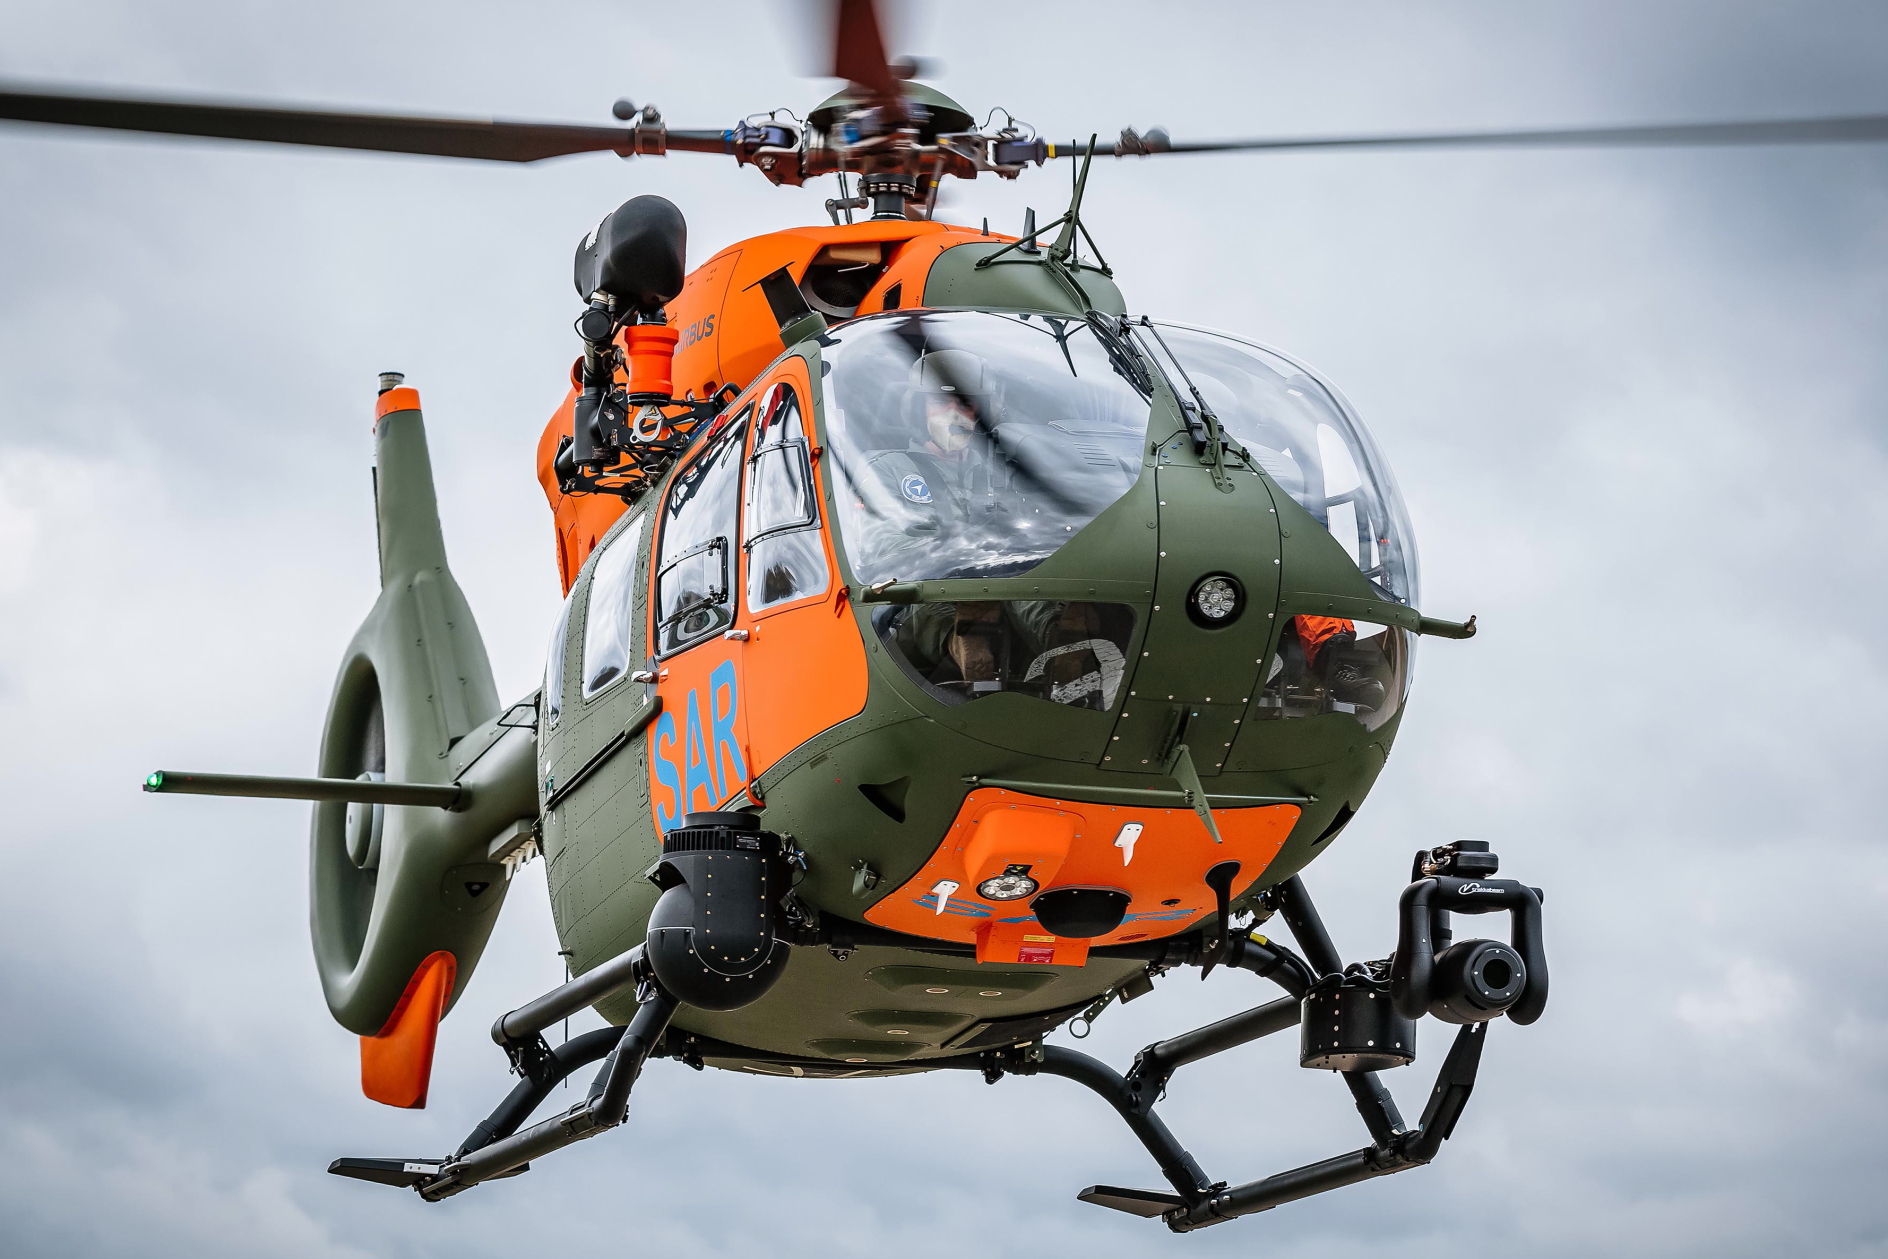 Airbus has handed over the seventh and last H145 helicopter to the search and rescue (SAR) service of the Bundeswehr. Operations with the new H145 LUH SAR are expected to commence shortly at the third SAR station in Holzdorf. Picture: Airbus Helicopters - Christian Keller Click to enlarge.